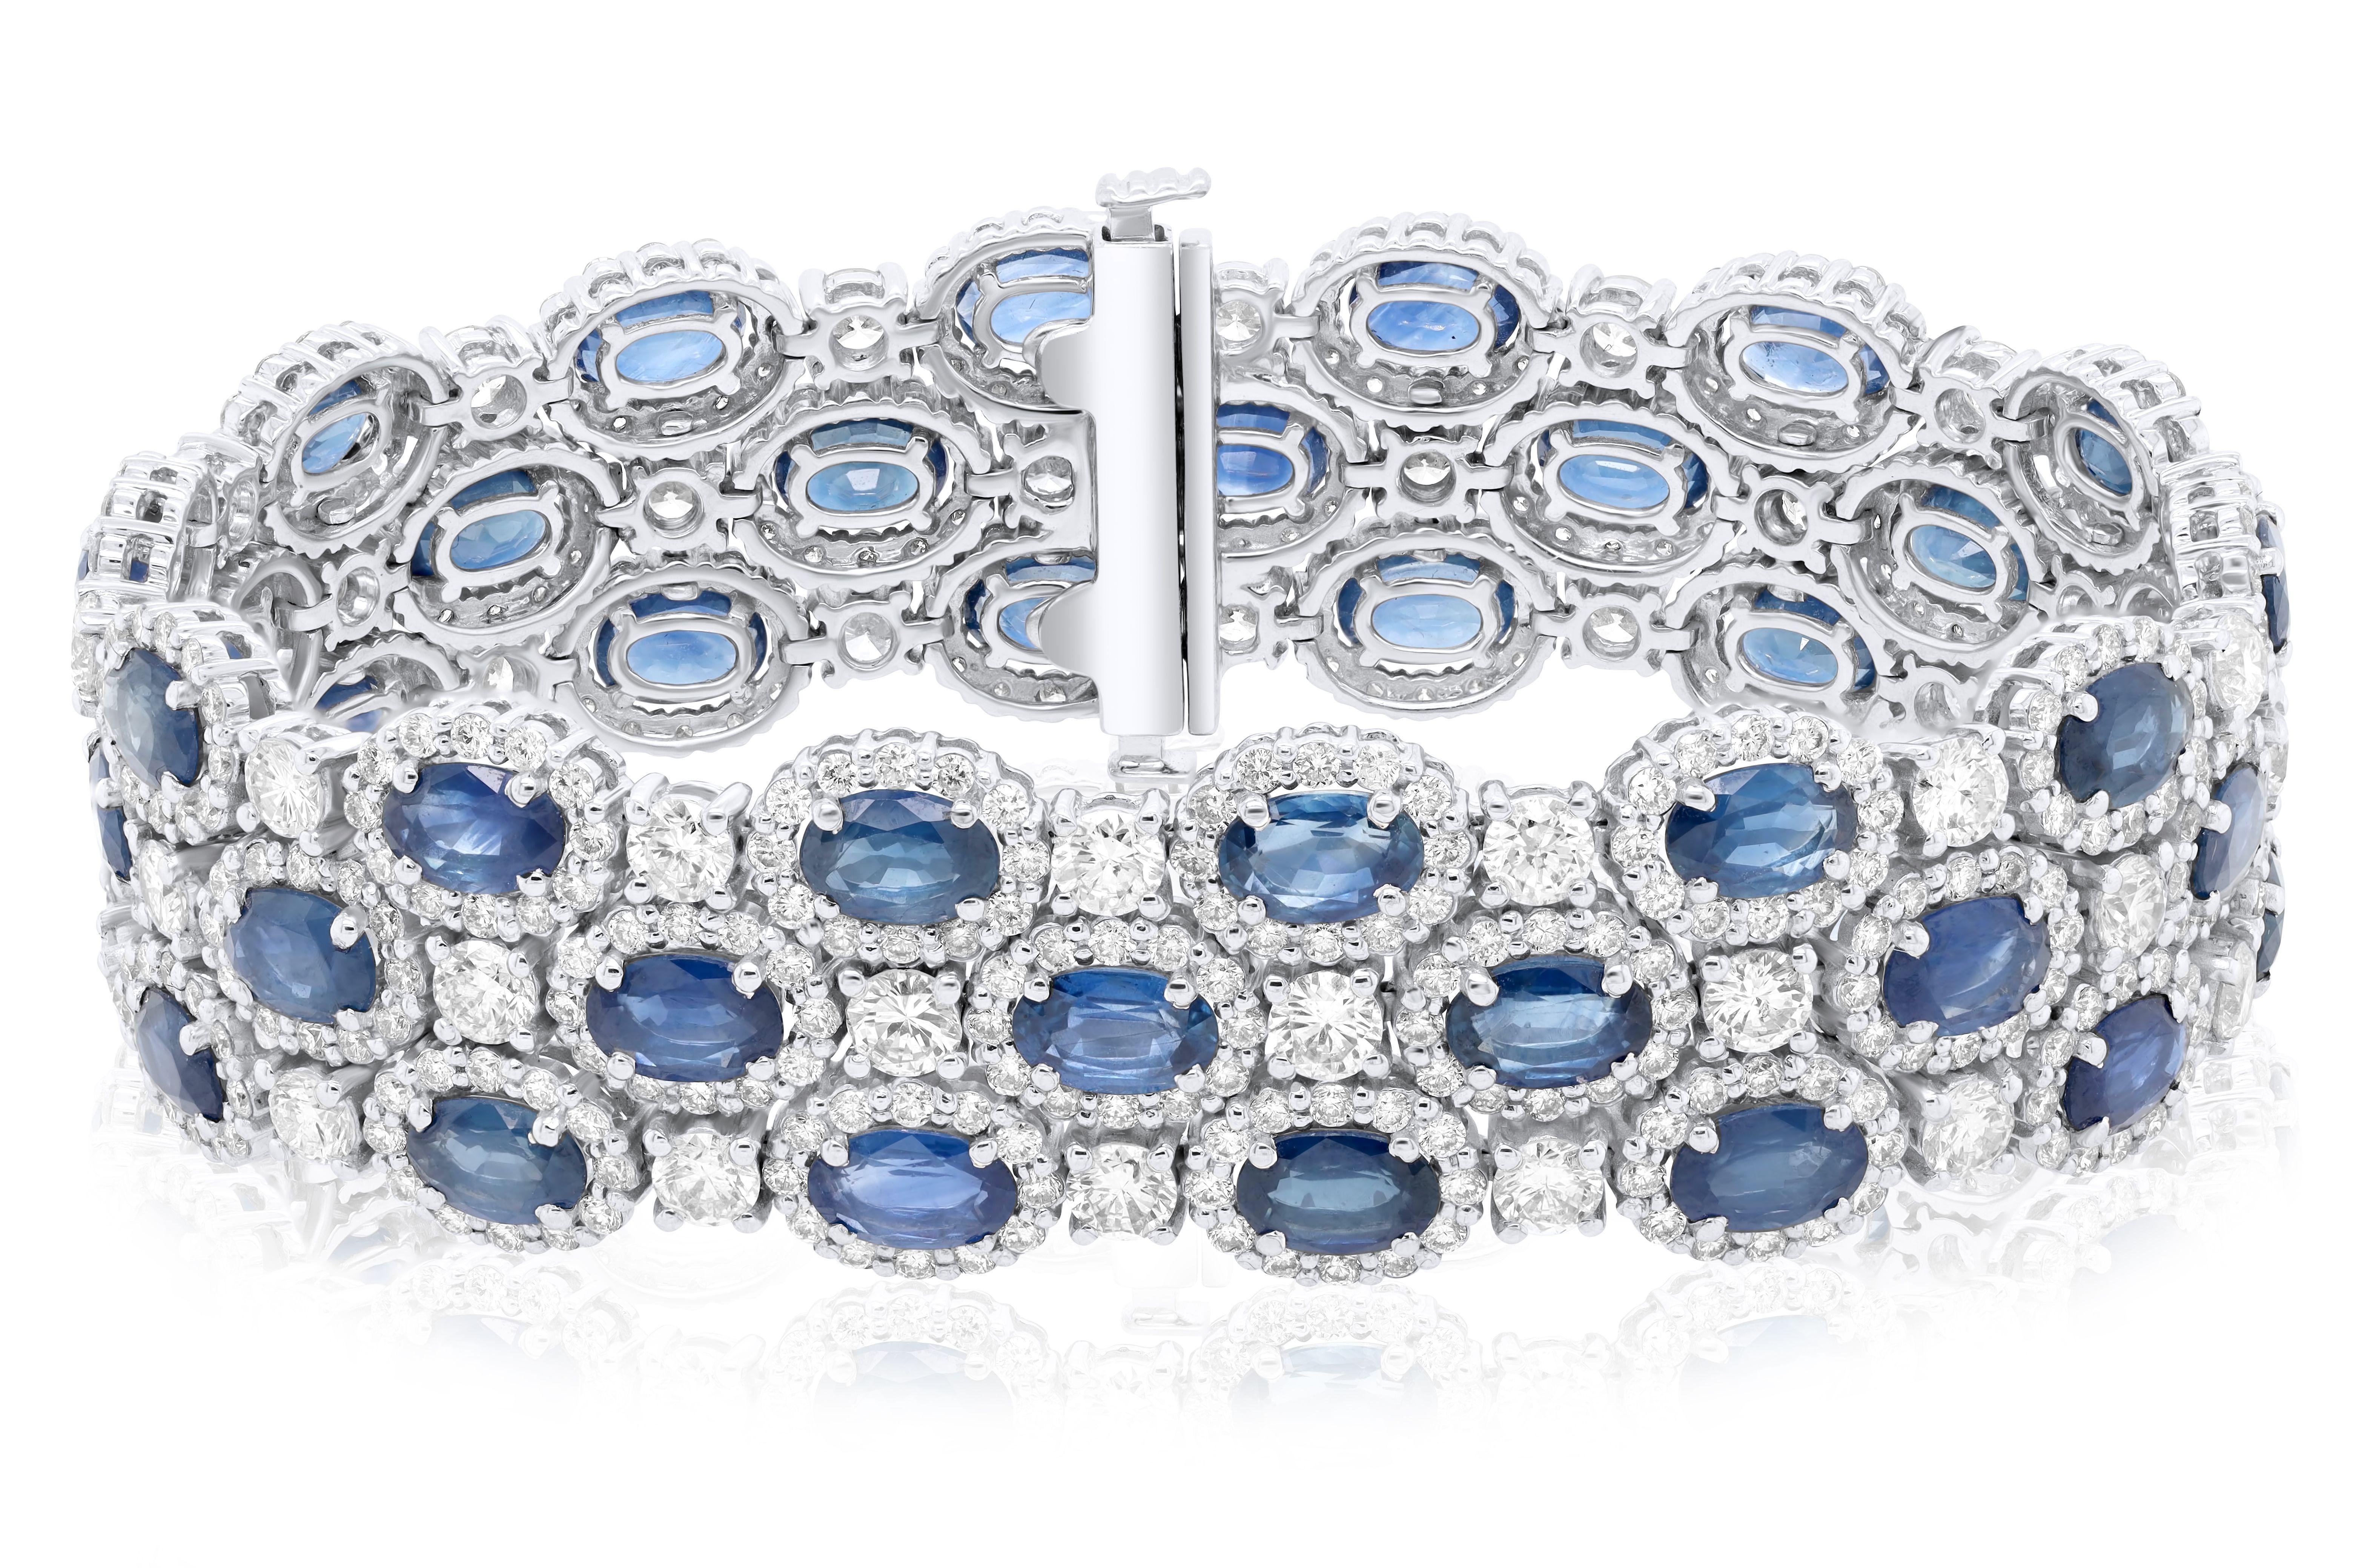 Oval Cut Diana M. 22.91 Carat Sapphire and 11.64 Carat Diamond Bracelet in White Gold For Sale